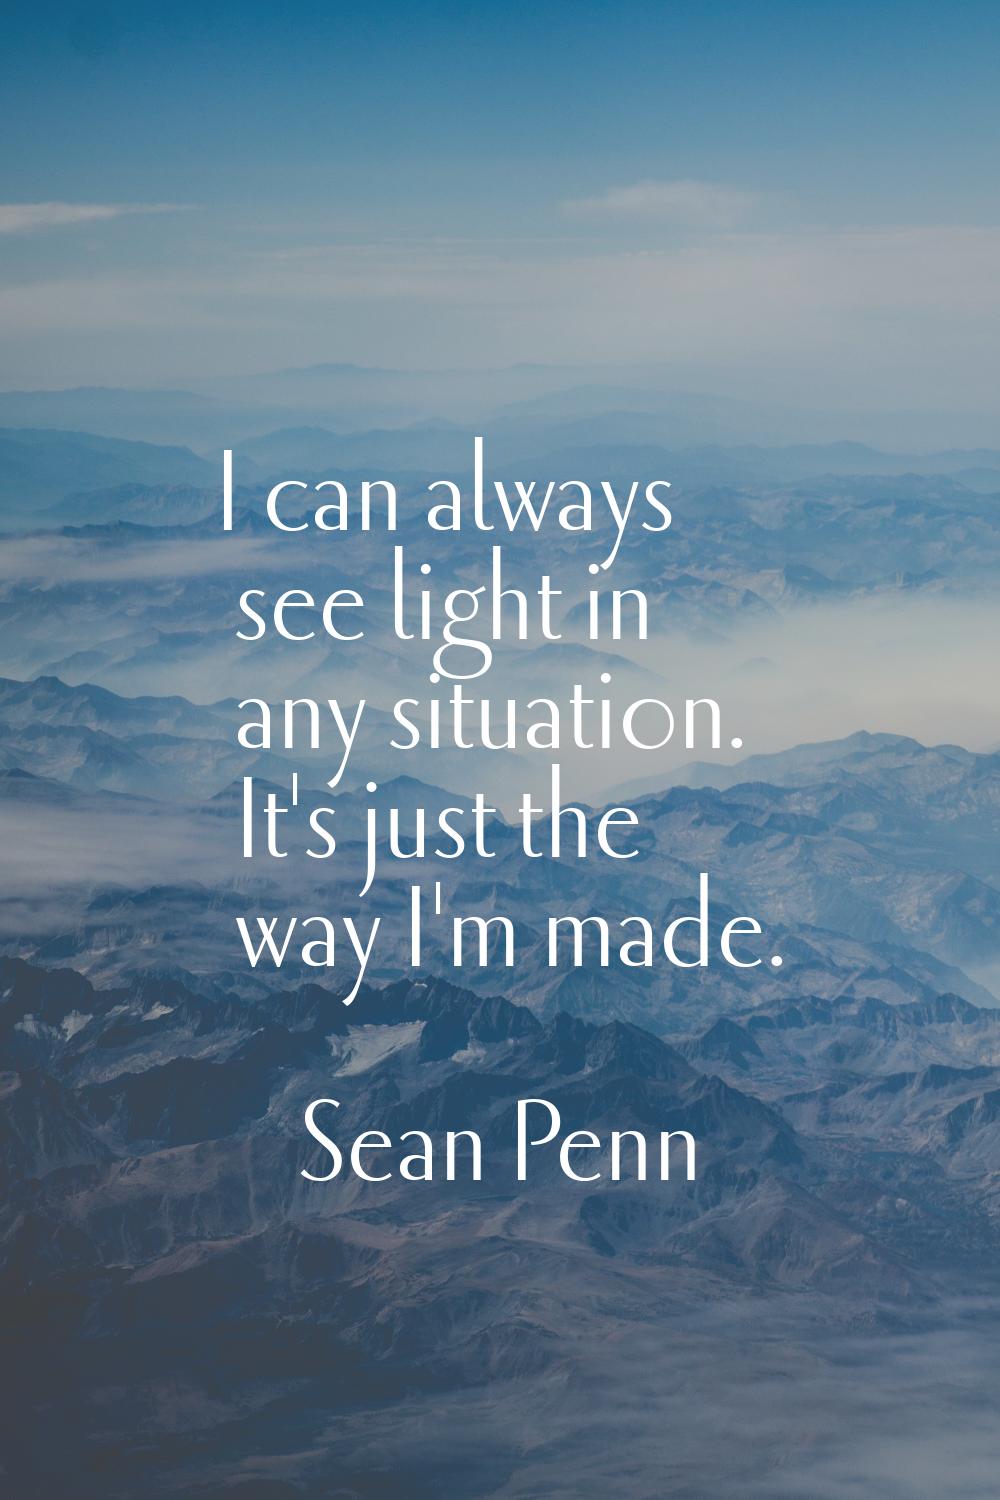 I can always see light in any situation. It's just the way I'm made.